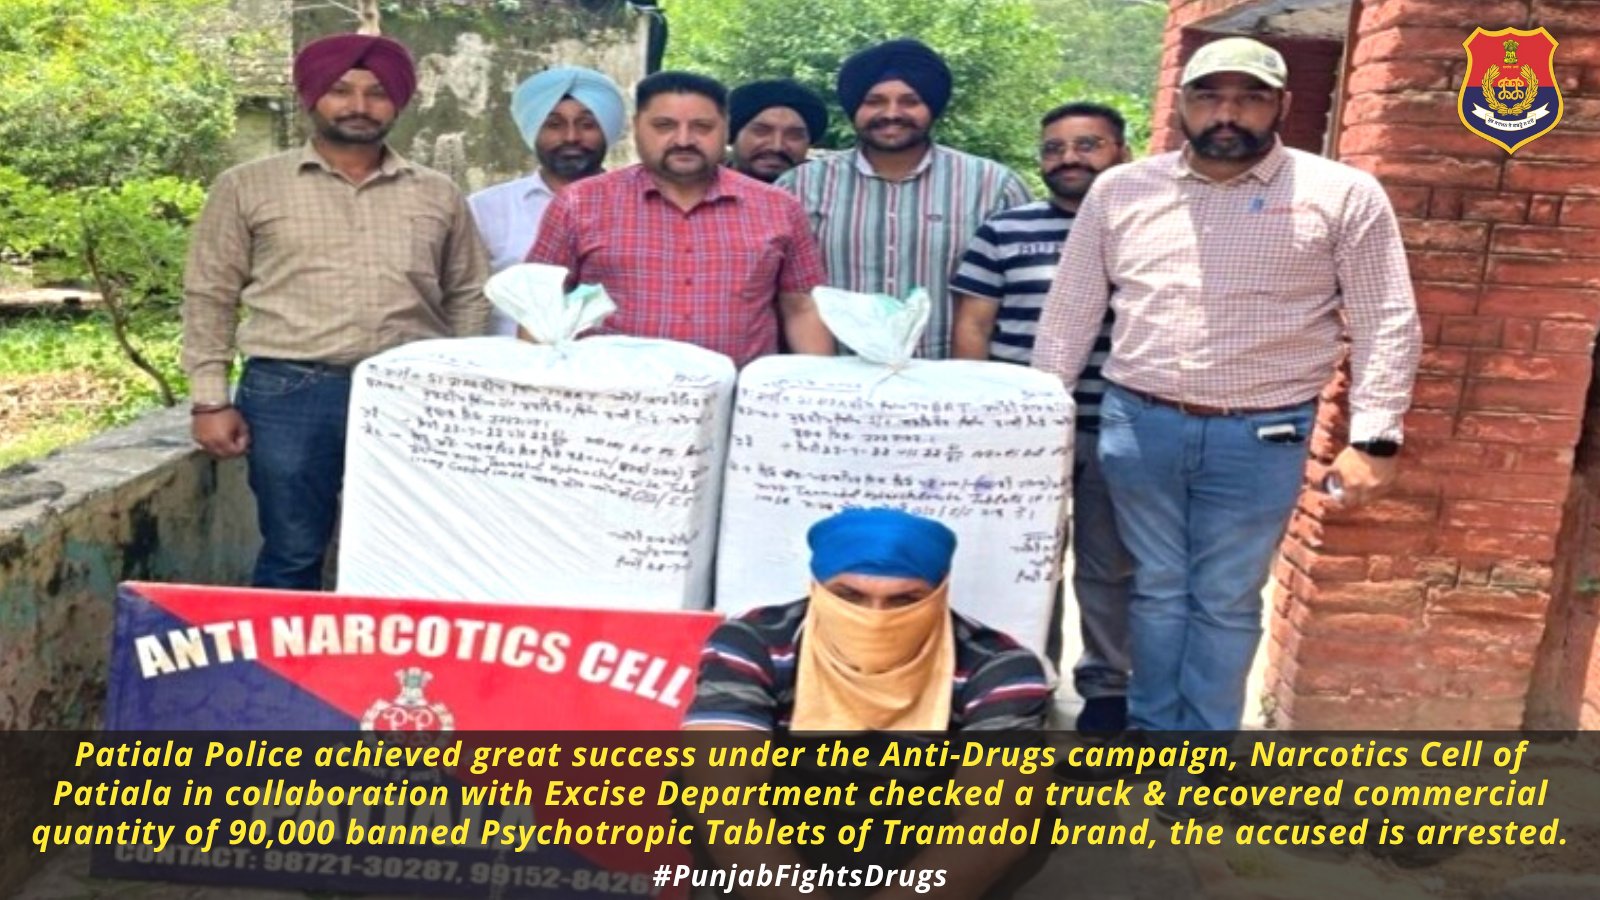 Patiala Police achieved great success under the campaign against drugs.